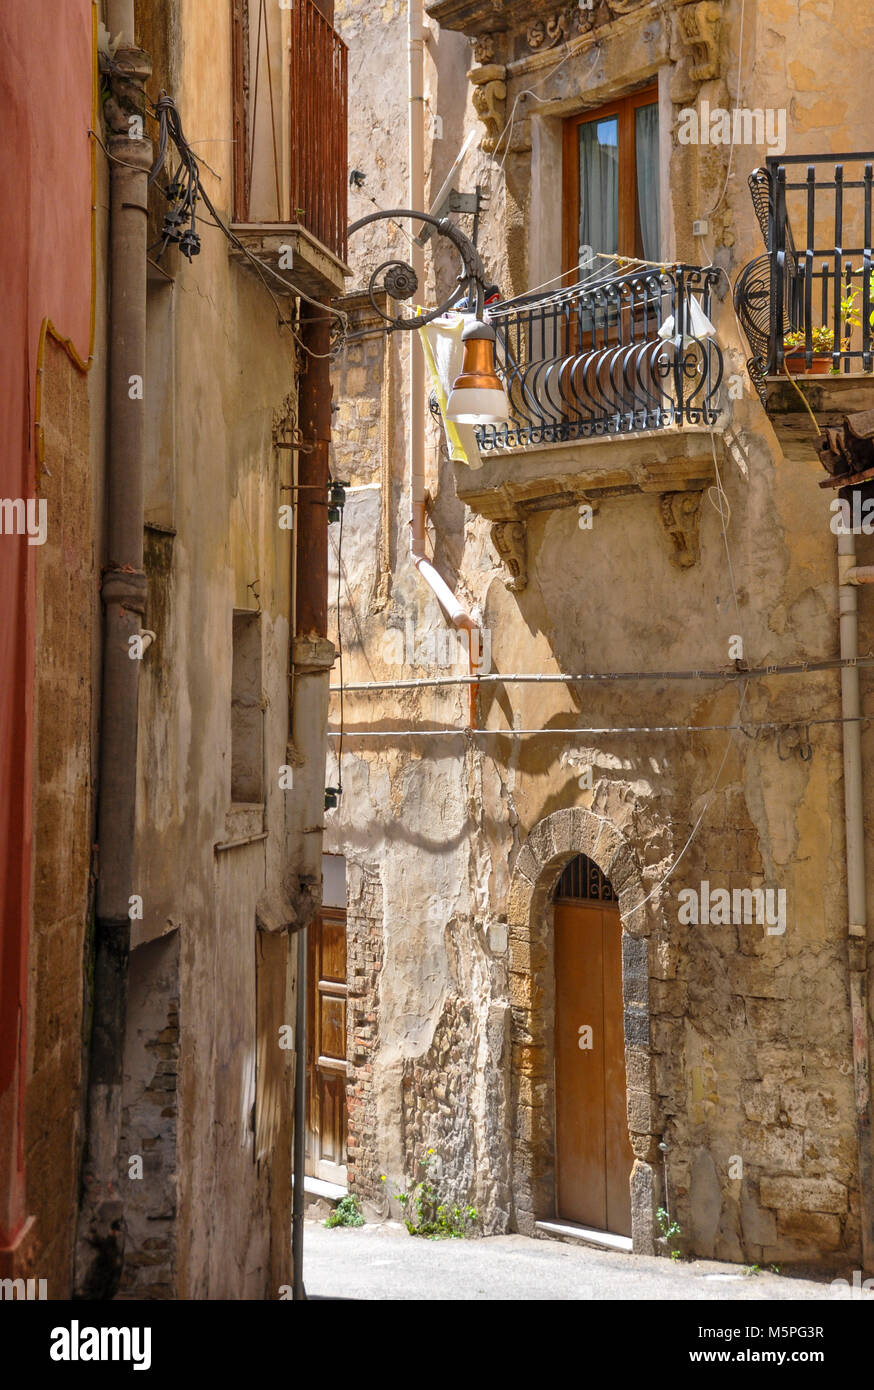 Rustic facade of  a balcony and dwelling in the town of Sciacca, Sicily, Italy. Stock Photo